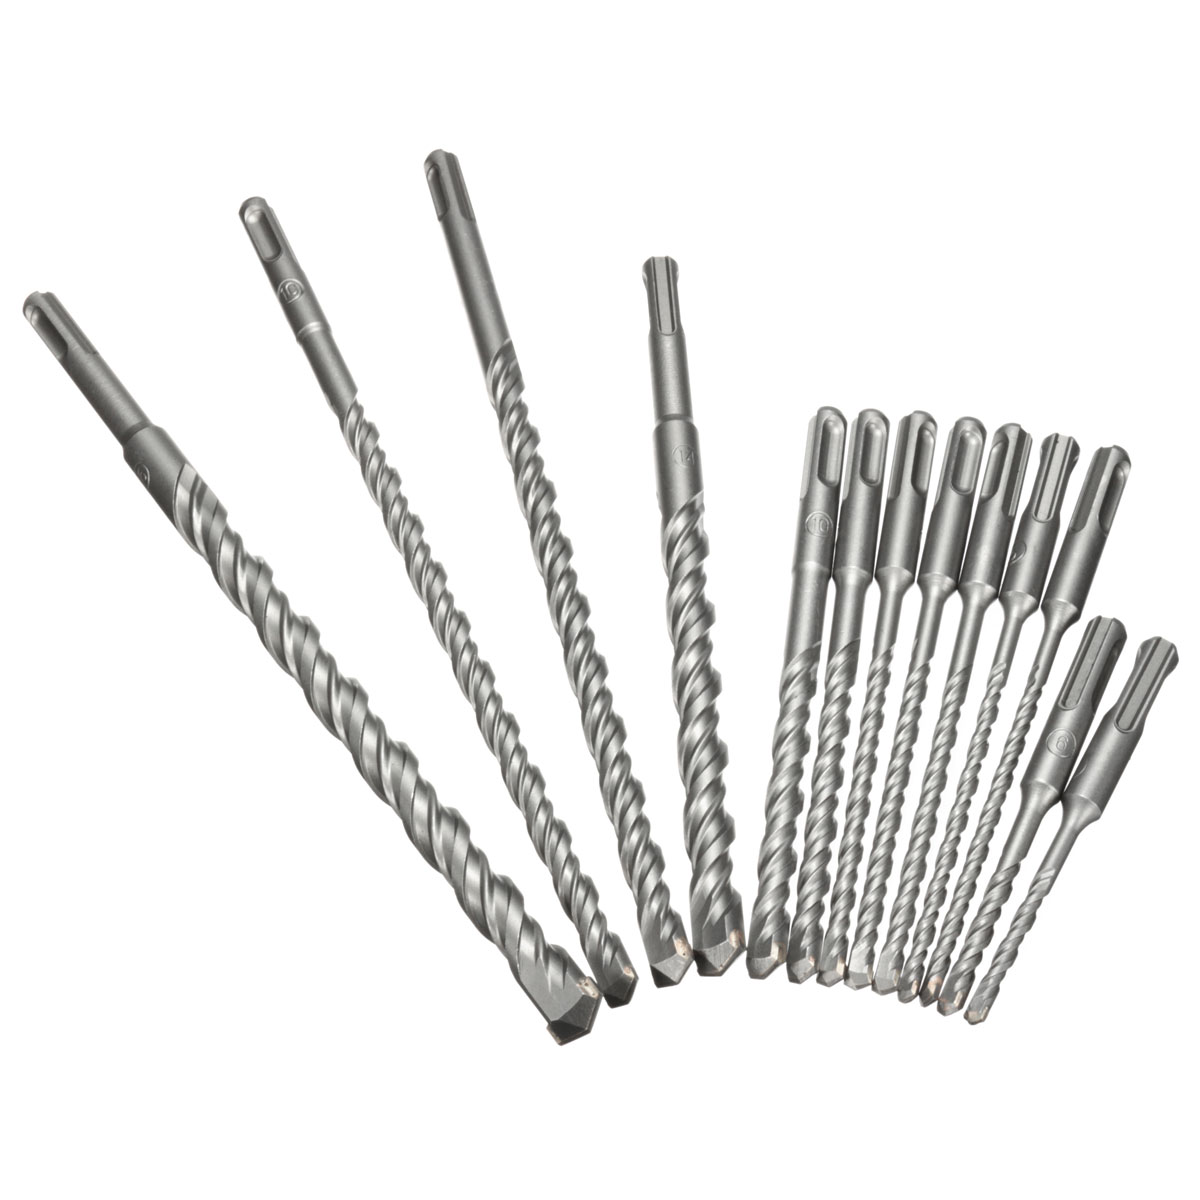 17-in-1-Drill-Bits-Chisel-SDS-Plus-Rotary-Hammer-Bits-Set-For-Bosch-Hilti-Plus-1359069